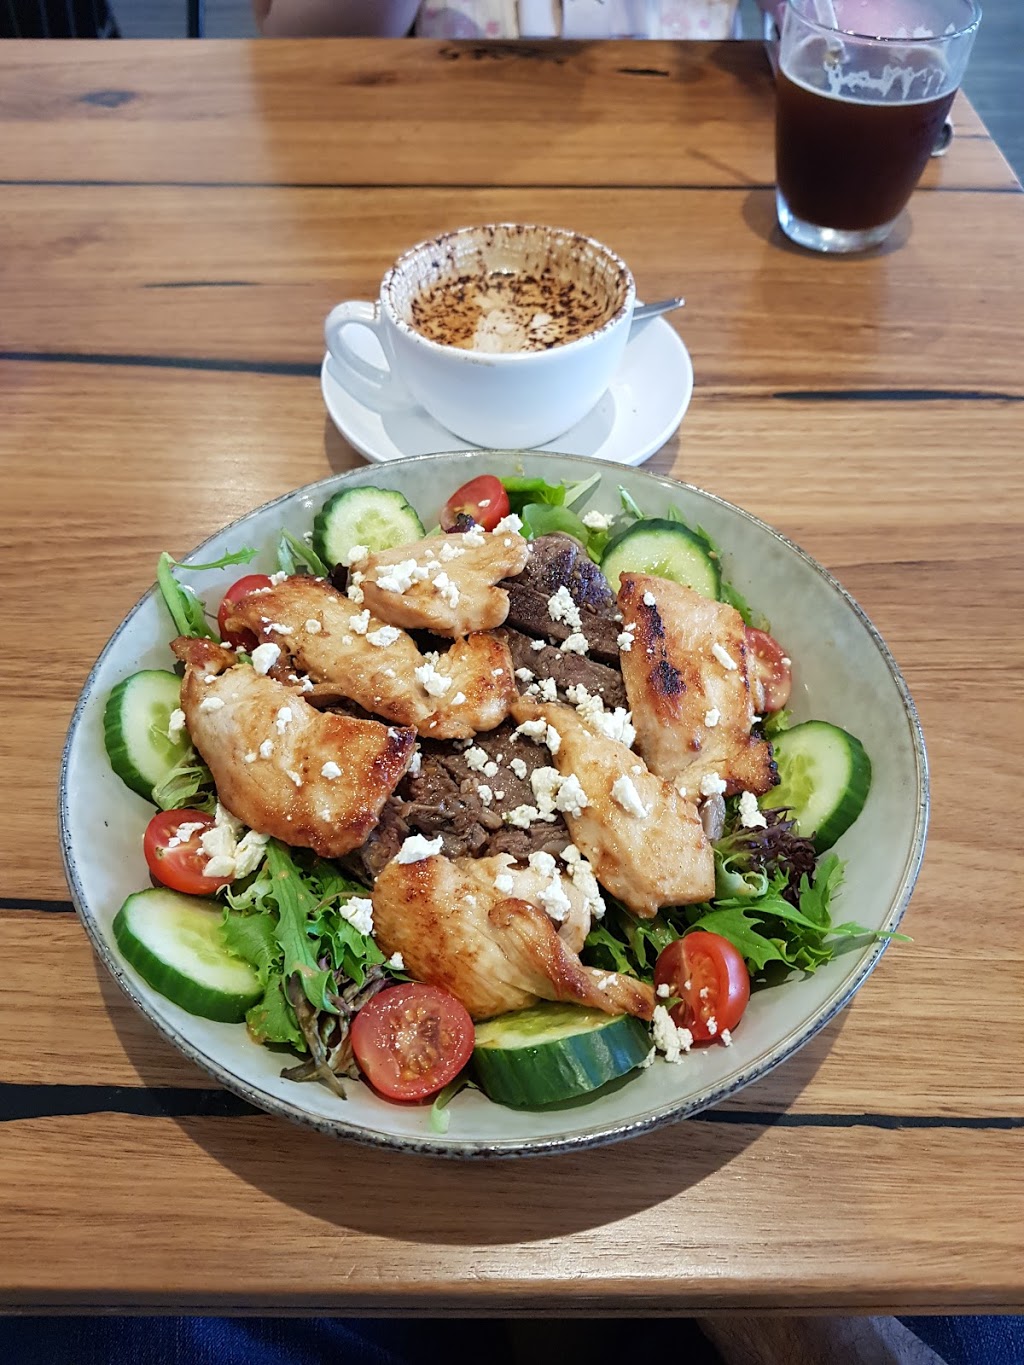 The Usual Joint | cafe | 32 Furlong Rd, Sunshine North VIC 3020, Australia